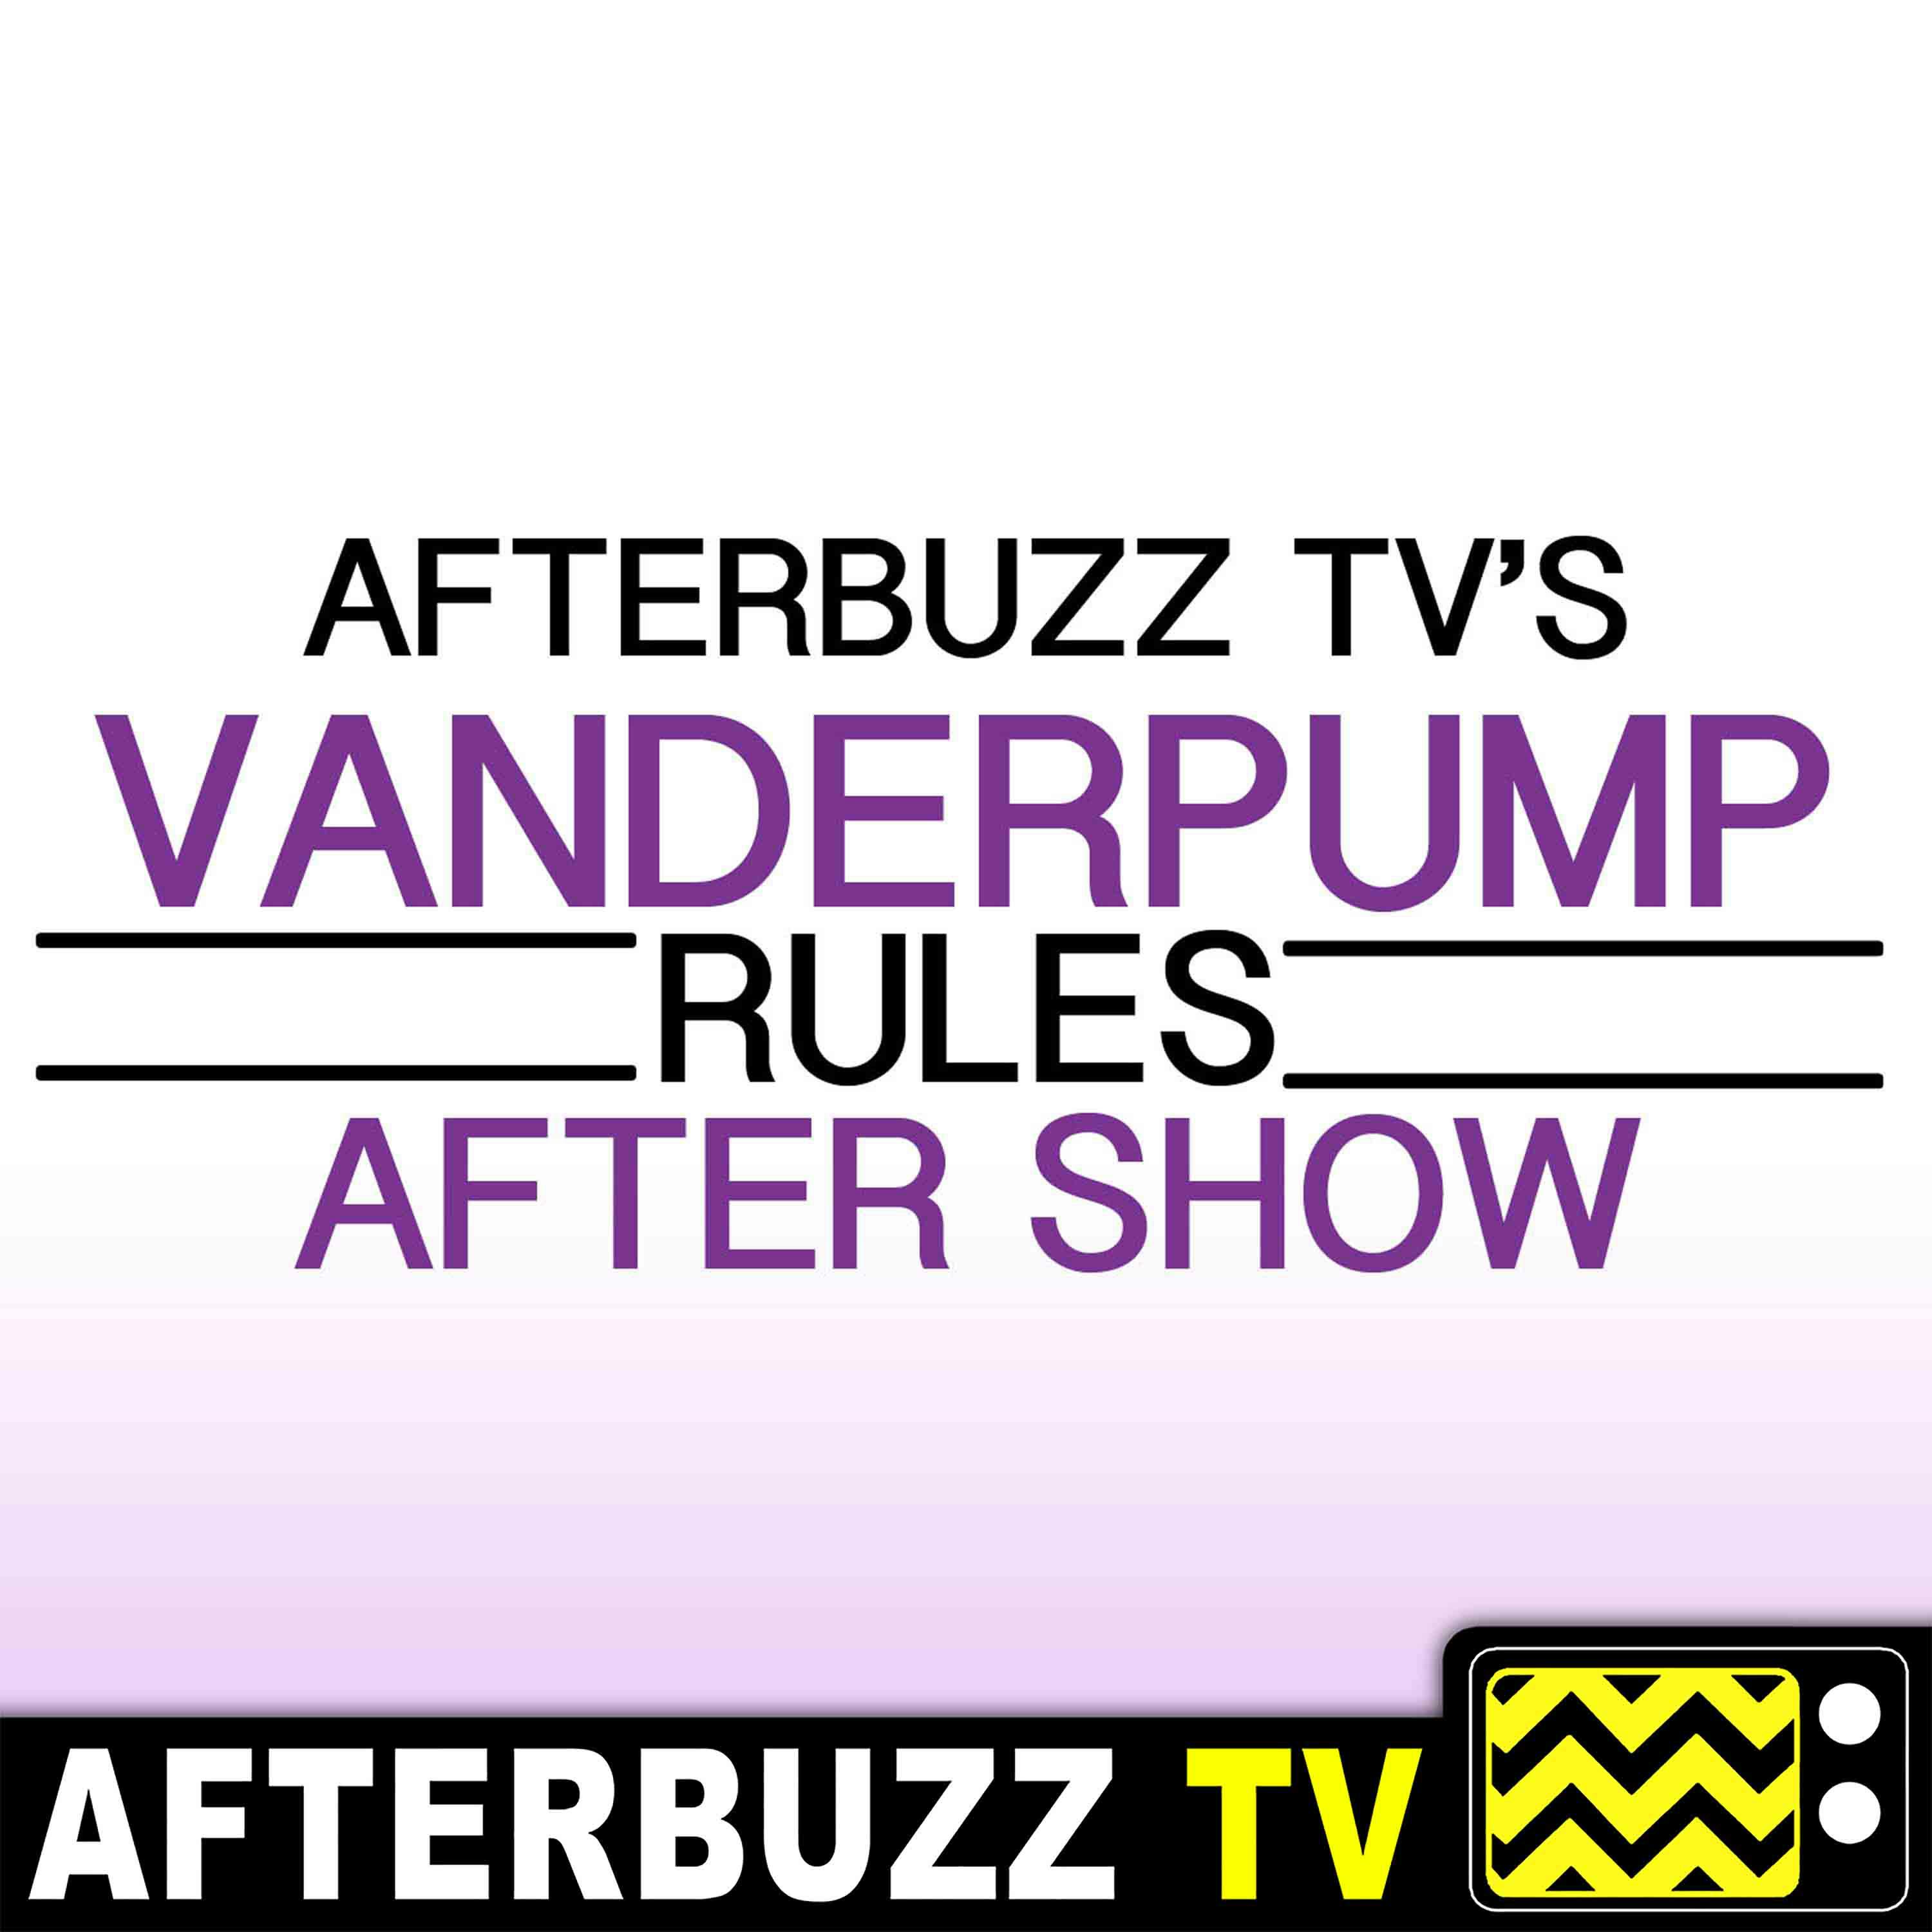 Reactions to Firings - Vanderpump Rules Special | AfterBuzz TV